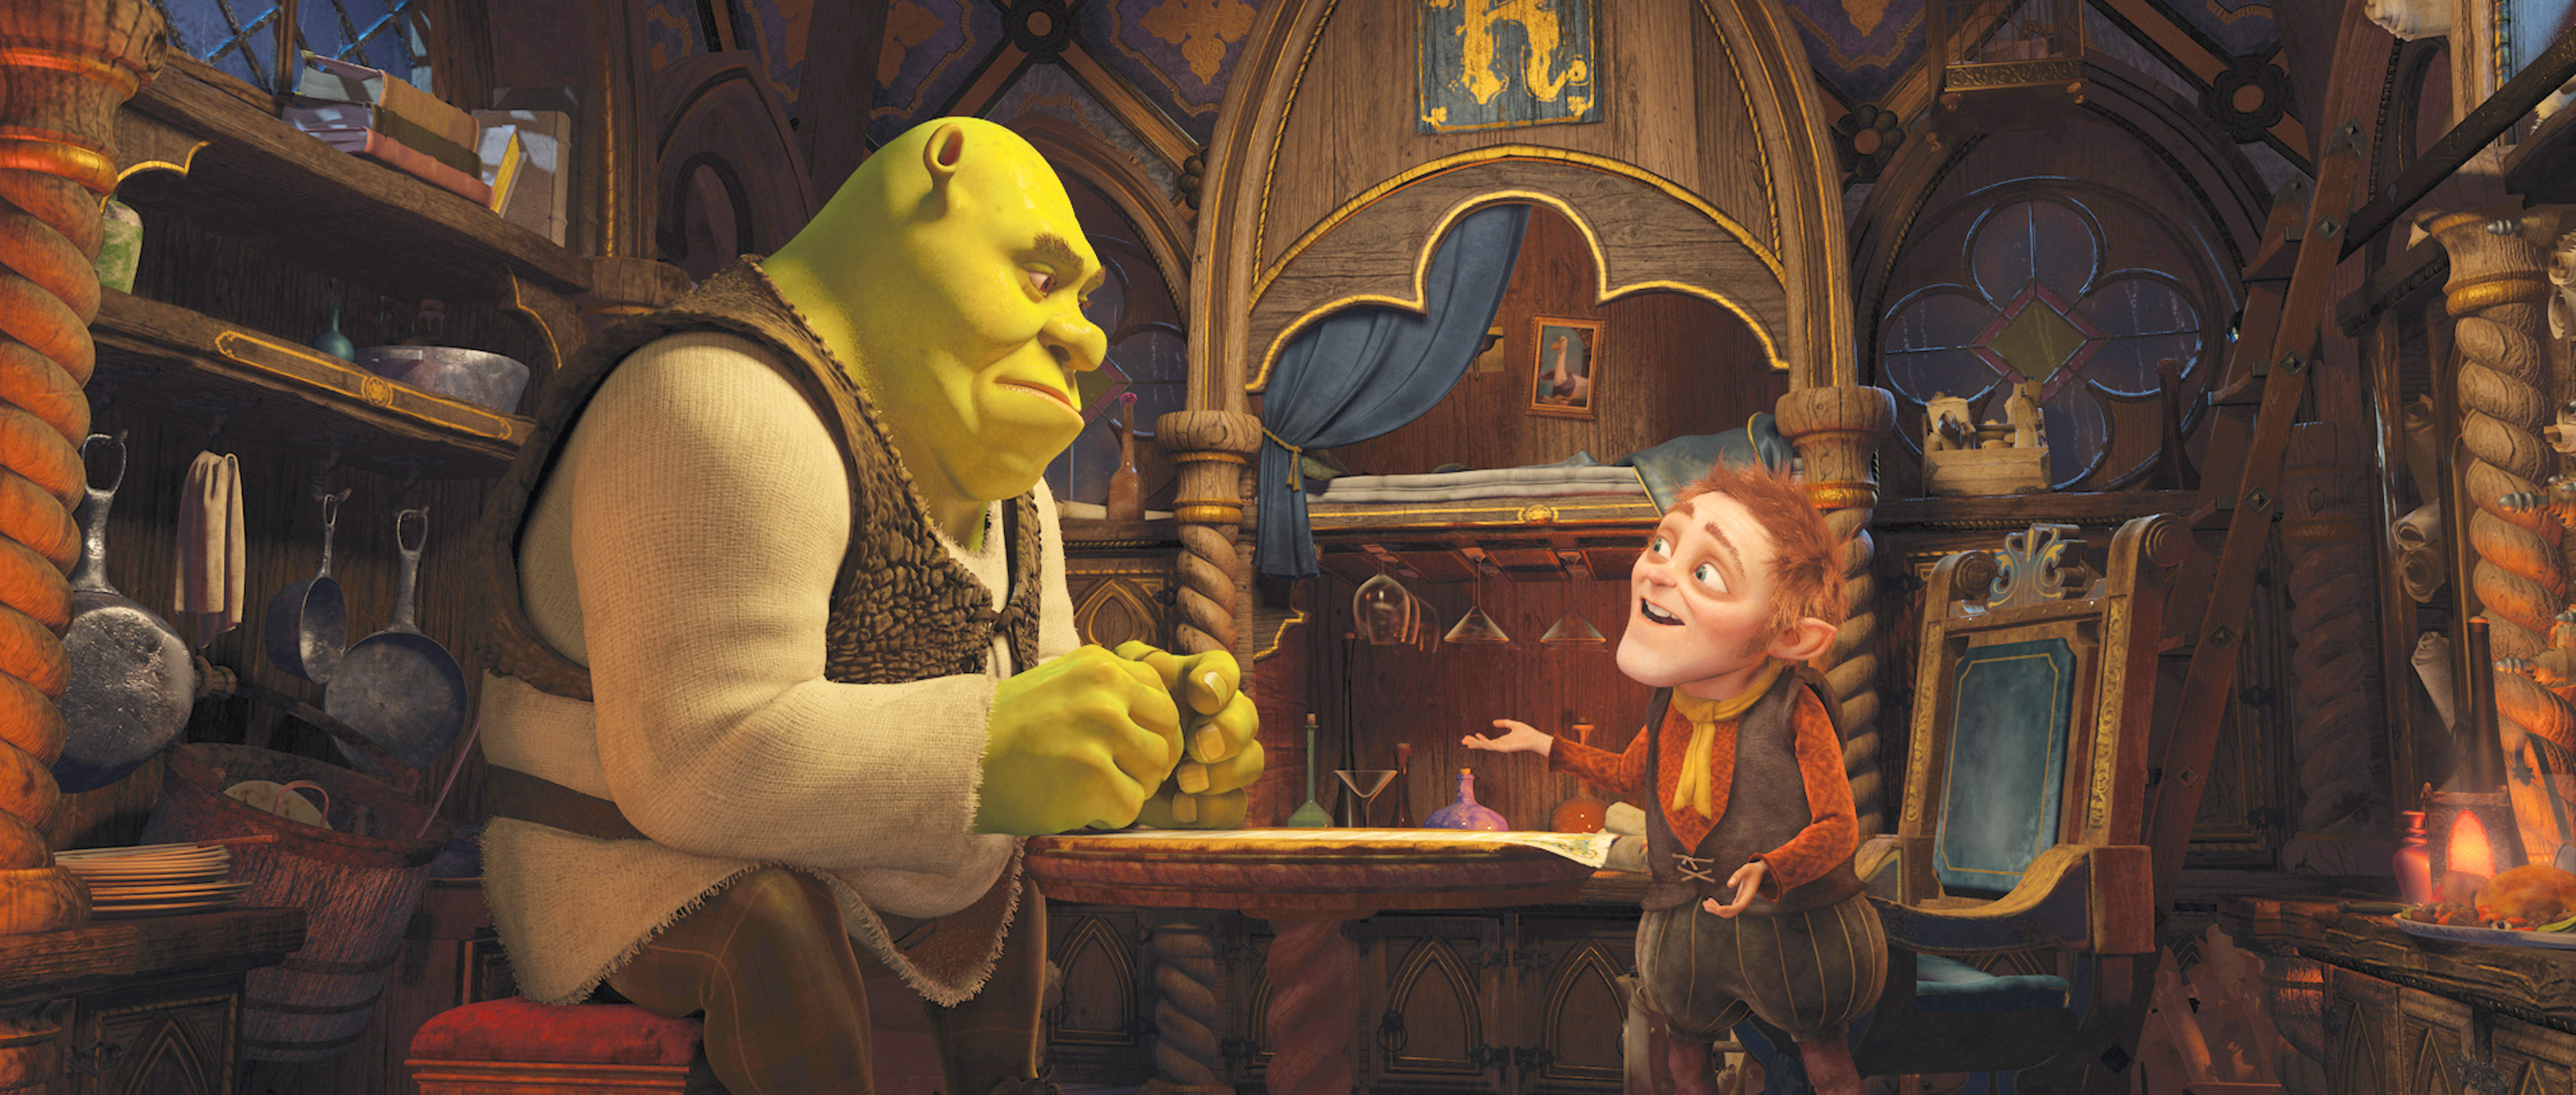  A scene from Paramount Pictures' &quot;Shrek Forever After&quot;.